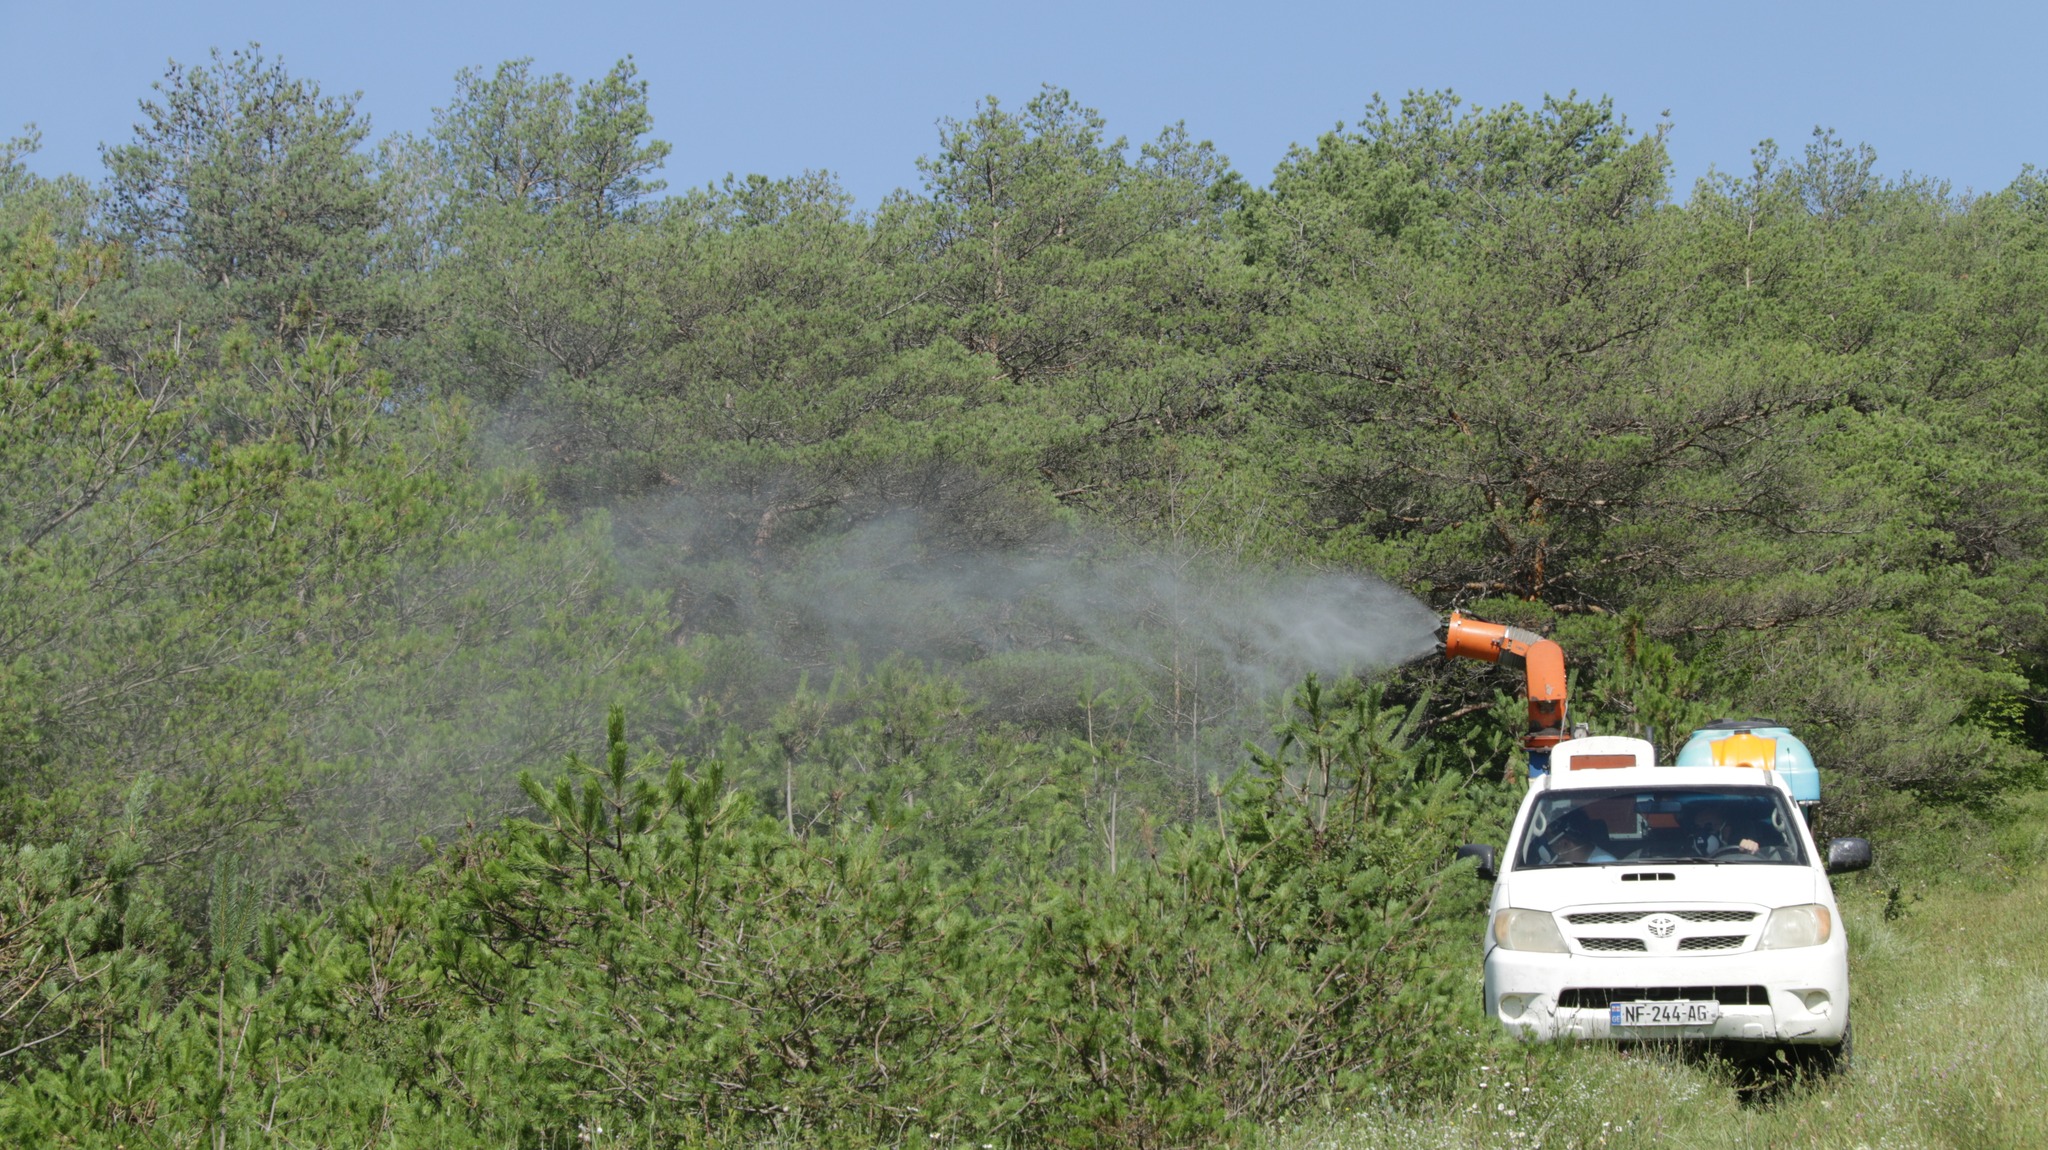 Measures against harmful pests are taken in the village of Avlev